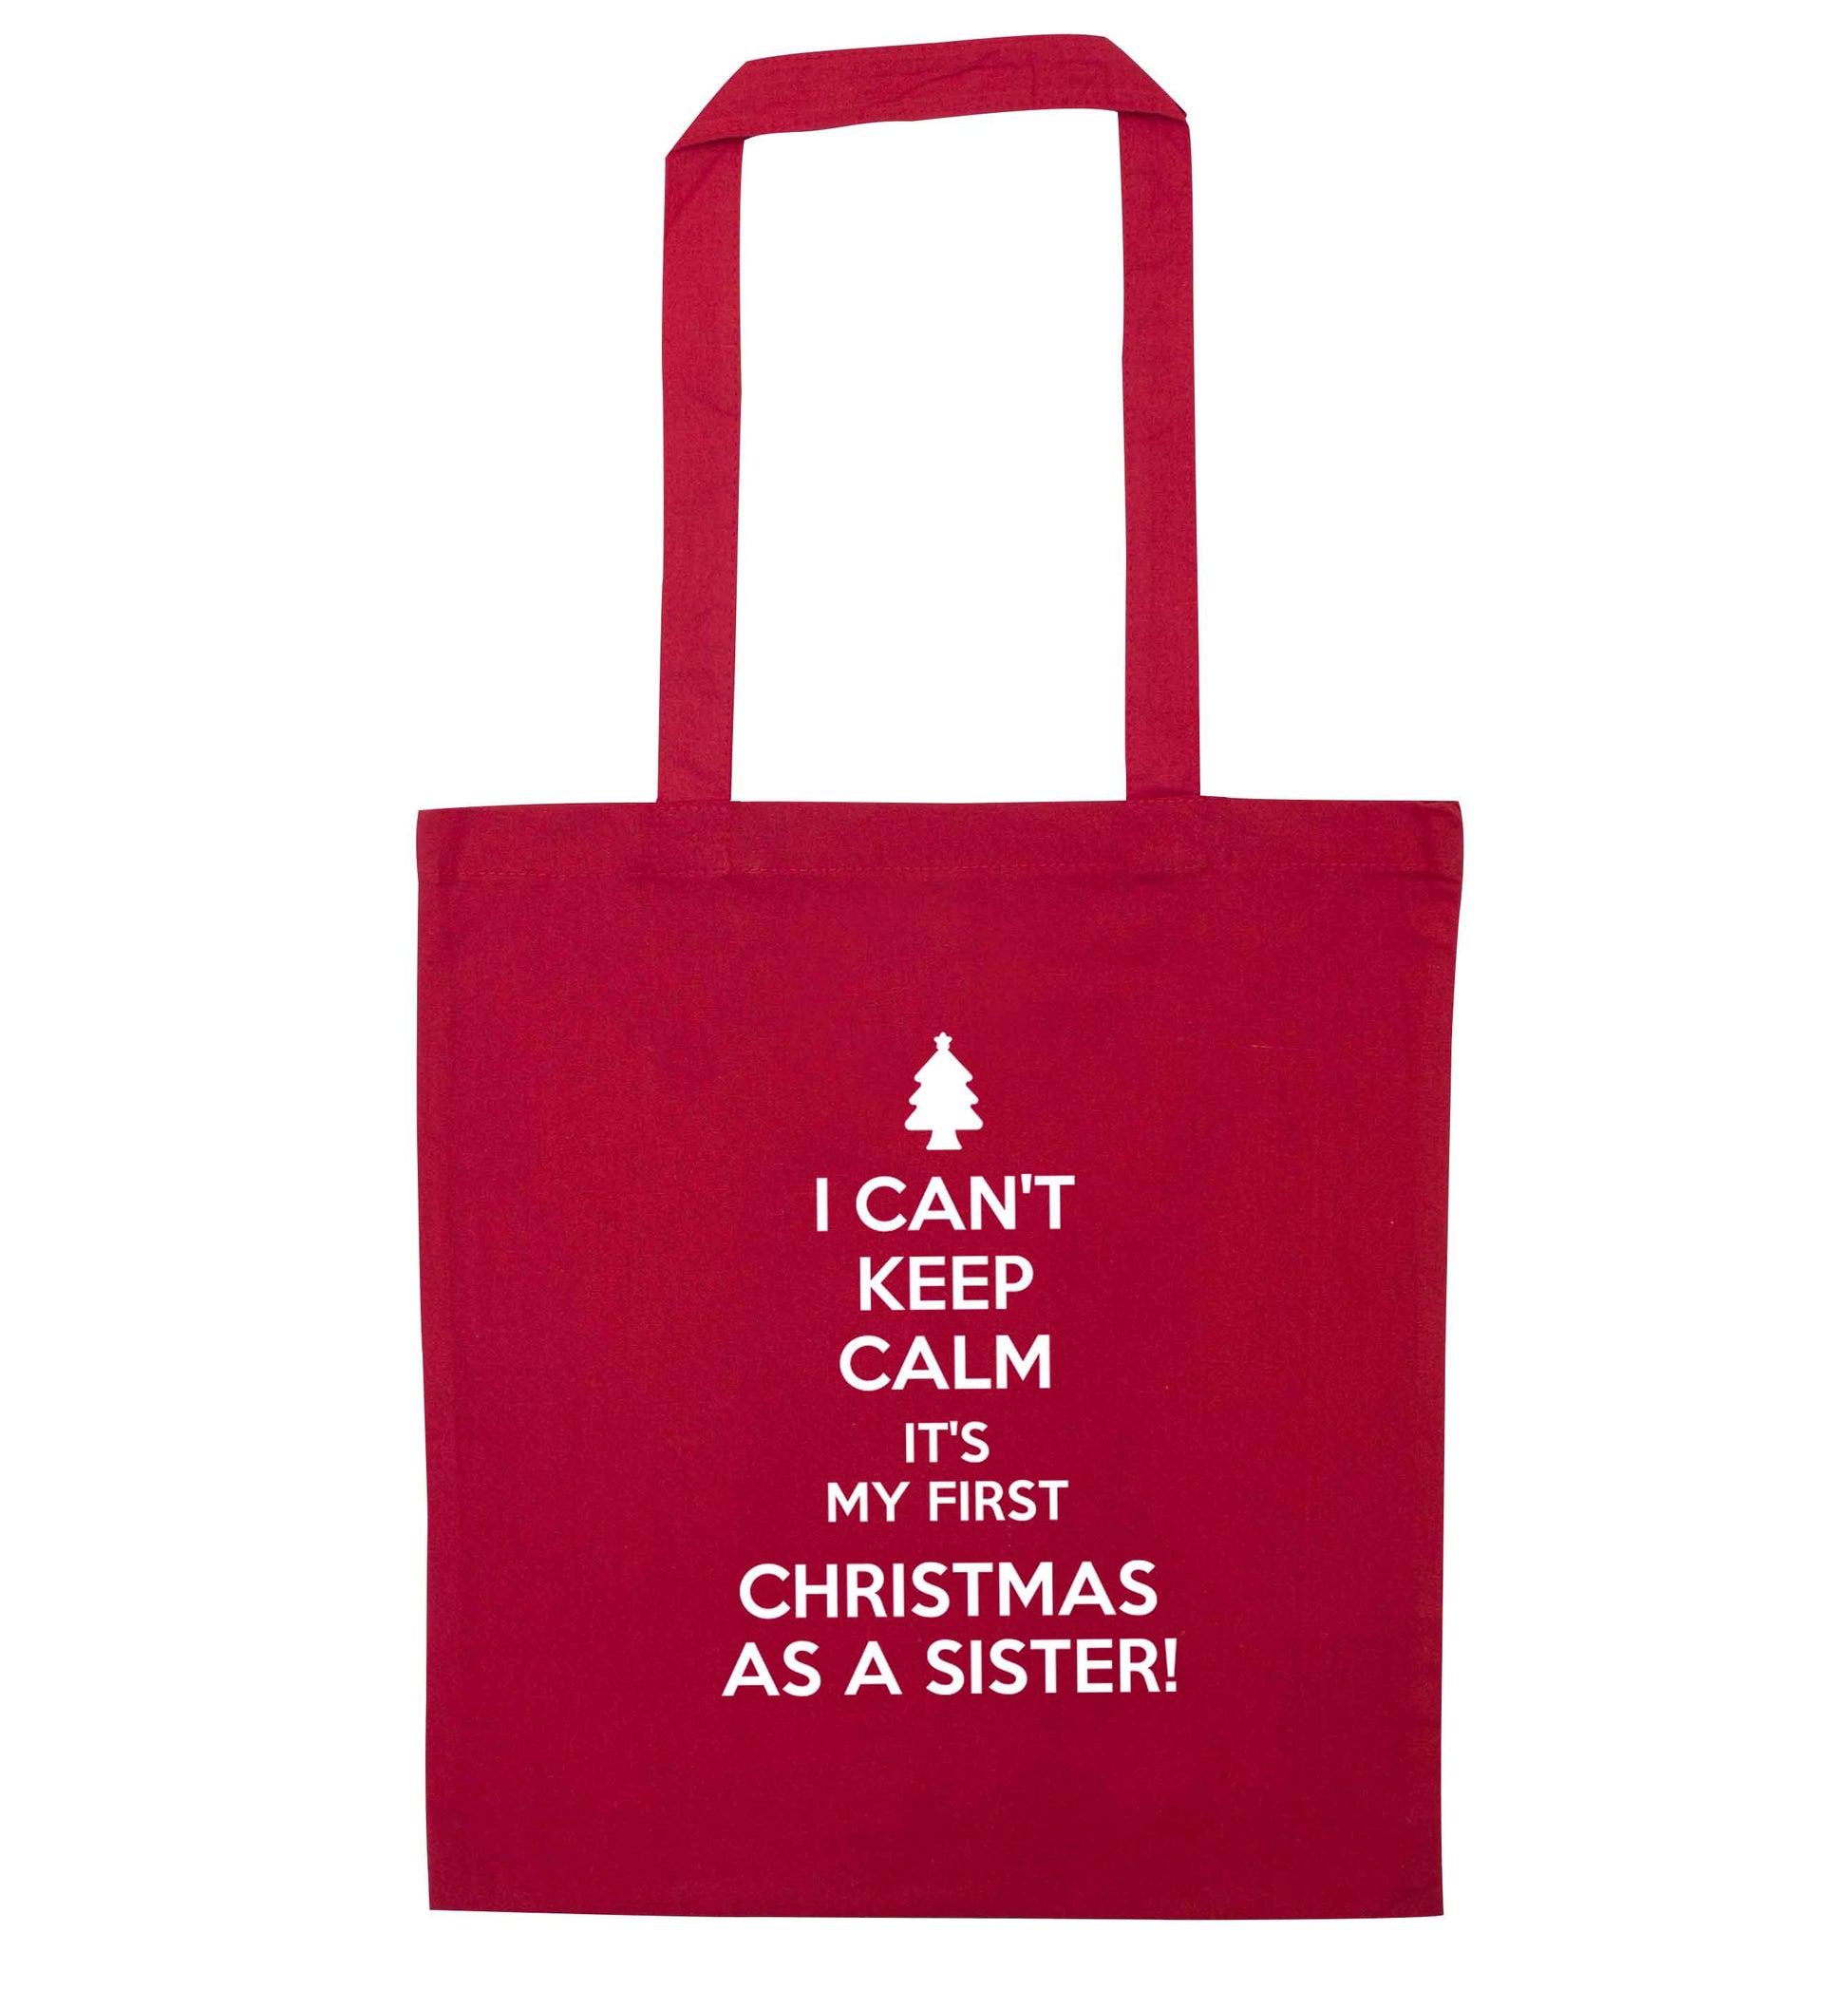 I can't keep calm it's my first Christmas as a sister! red tote bag